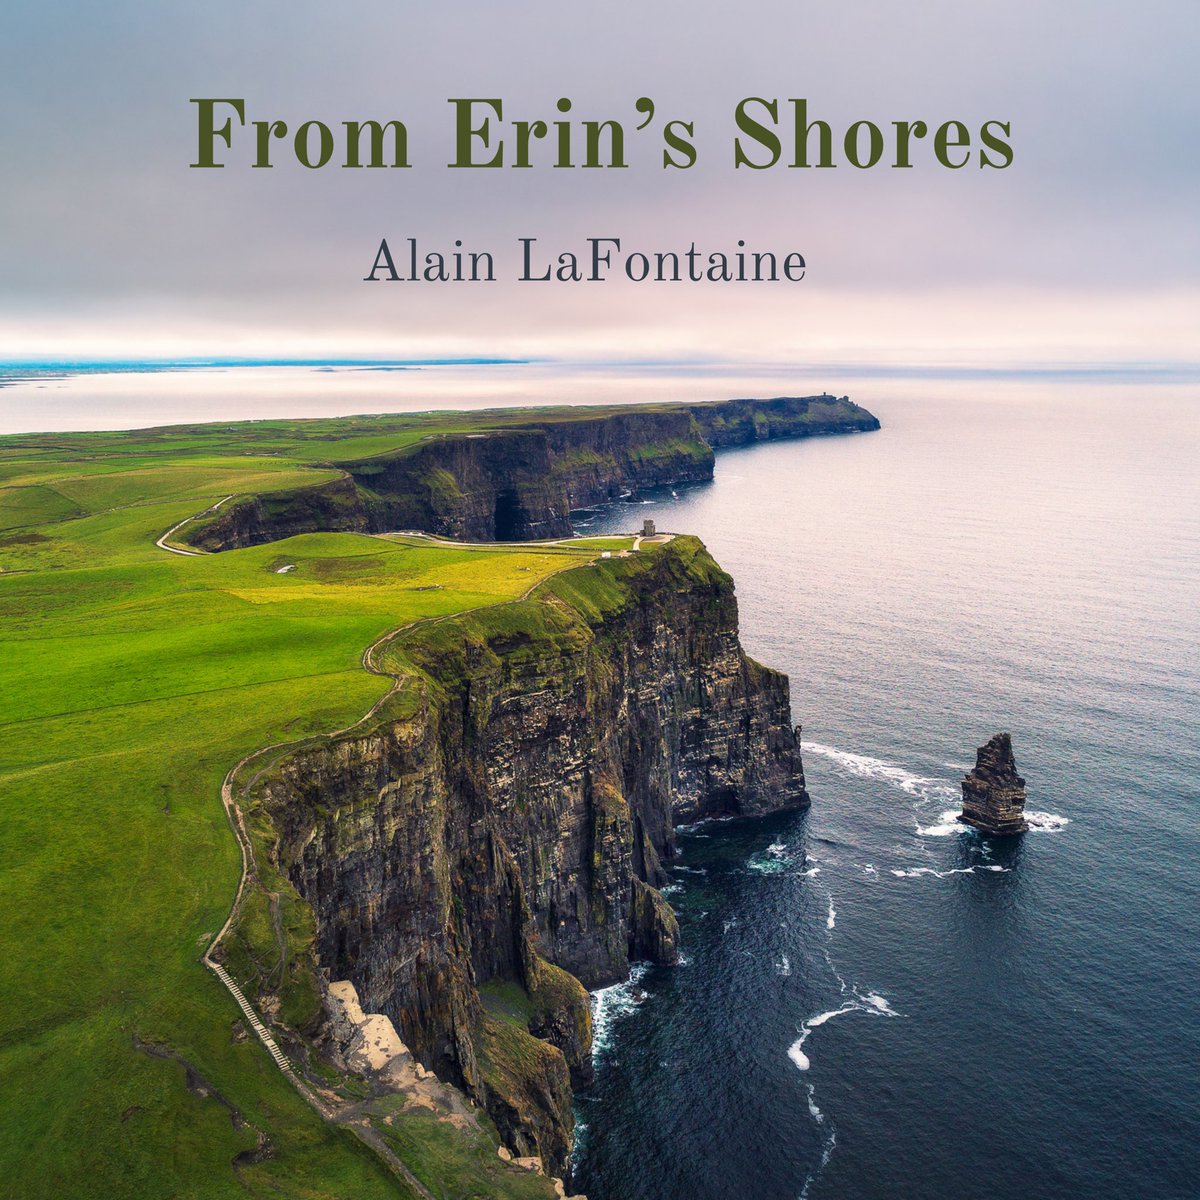 With St. Patrick’s Day fast approaching it seemed only fitting to release some Irish☘️music. My calm acoustic guitar version of ‘From Erin’s Shores’ is now streaming wherever you like to listen ! songwhip.com/alainlafontain… @pandoraAMP @Spotify @AppleMusic #StPatricksDay #guitar